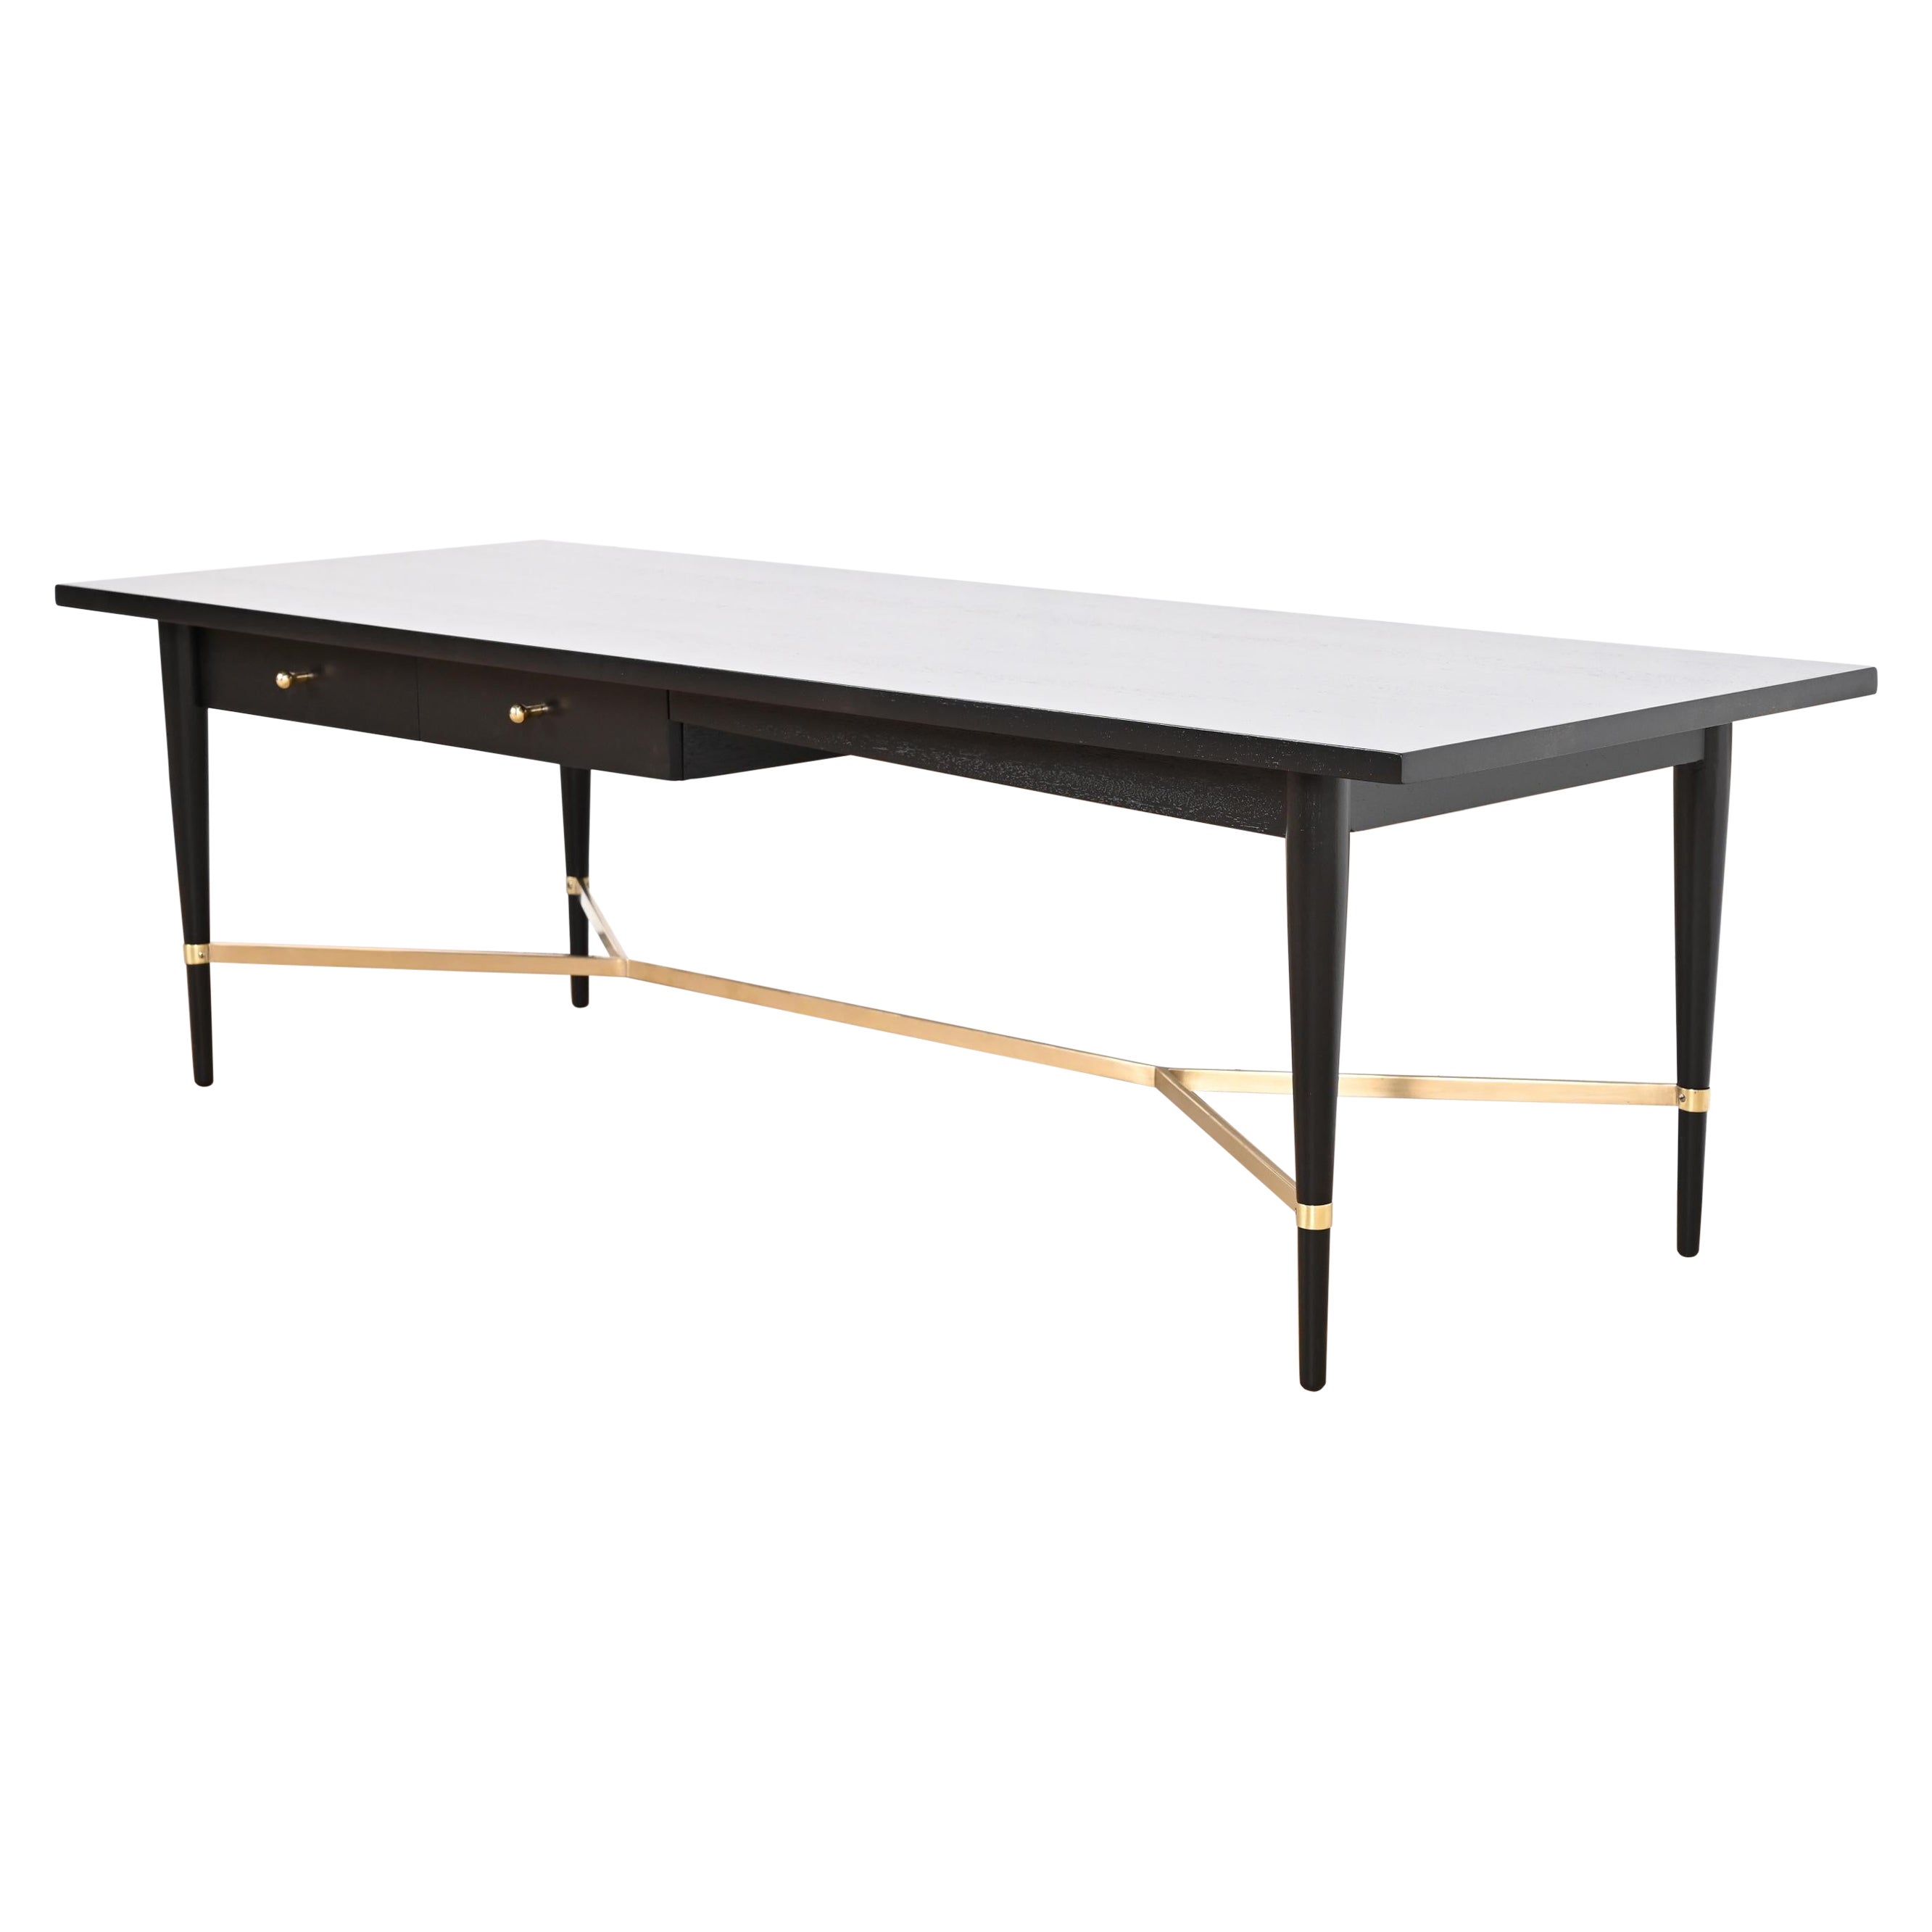 Paul McCobb Connoisseur Collection Black Lacquer and Brass Coffee Table, 1950s